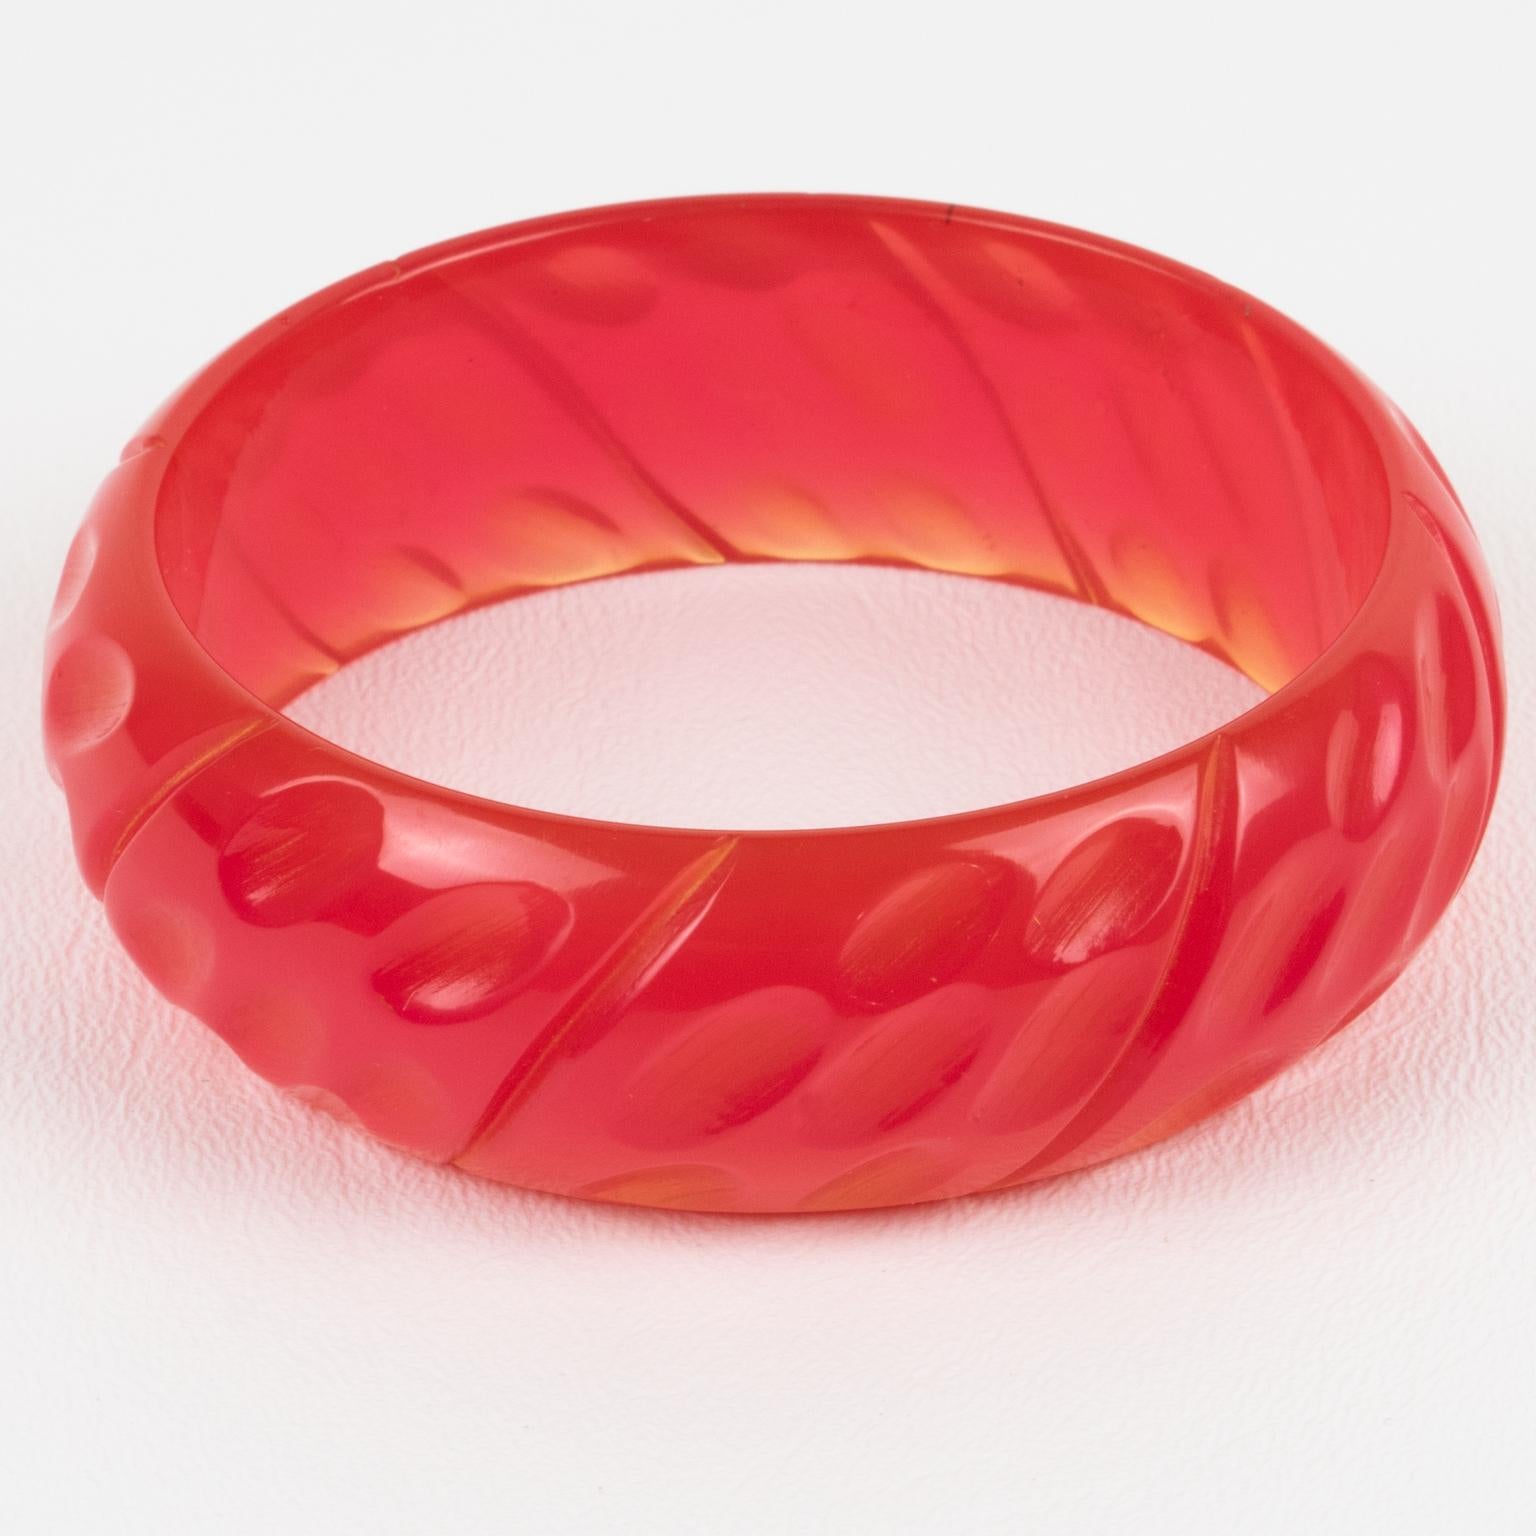 This is a spectacular hot pink bubblegum Bakelite bracelet bangle. It features a chunky domed shape with geometric and deeply carved designs all around. The color is an intense hot pink plain tone with complete translucency. 
Measurements: Inside